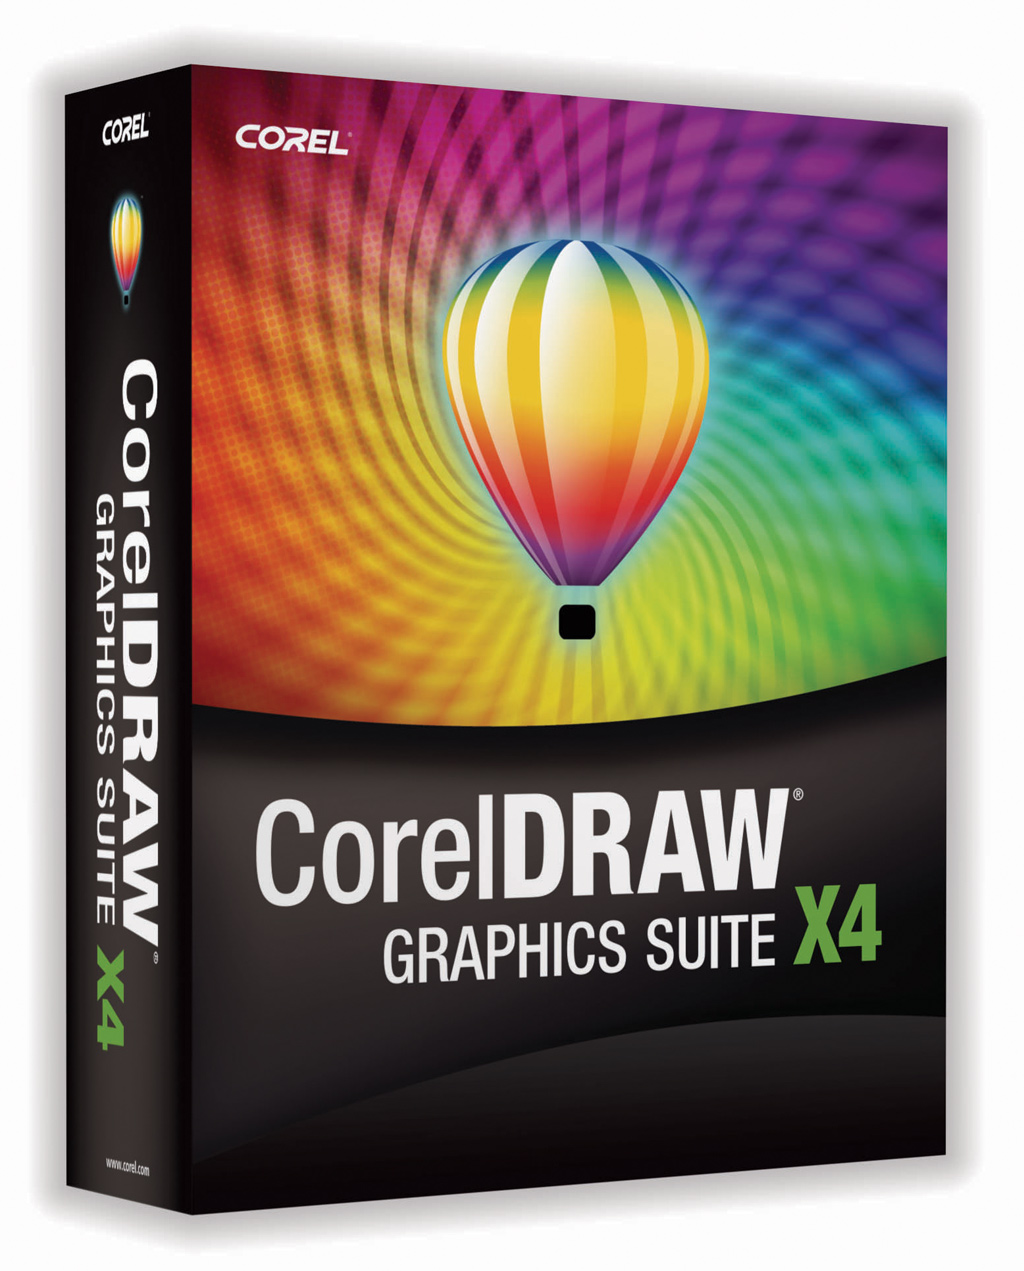 CorelDRAW Graphics Suite X4 special edition - What Digital Camera